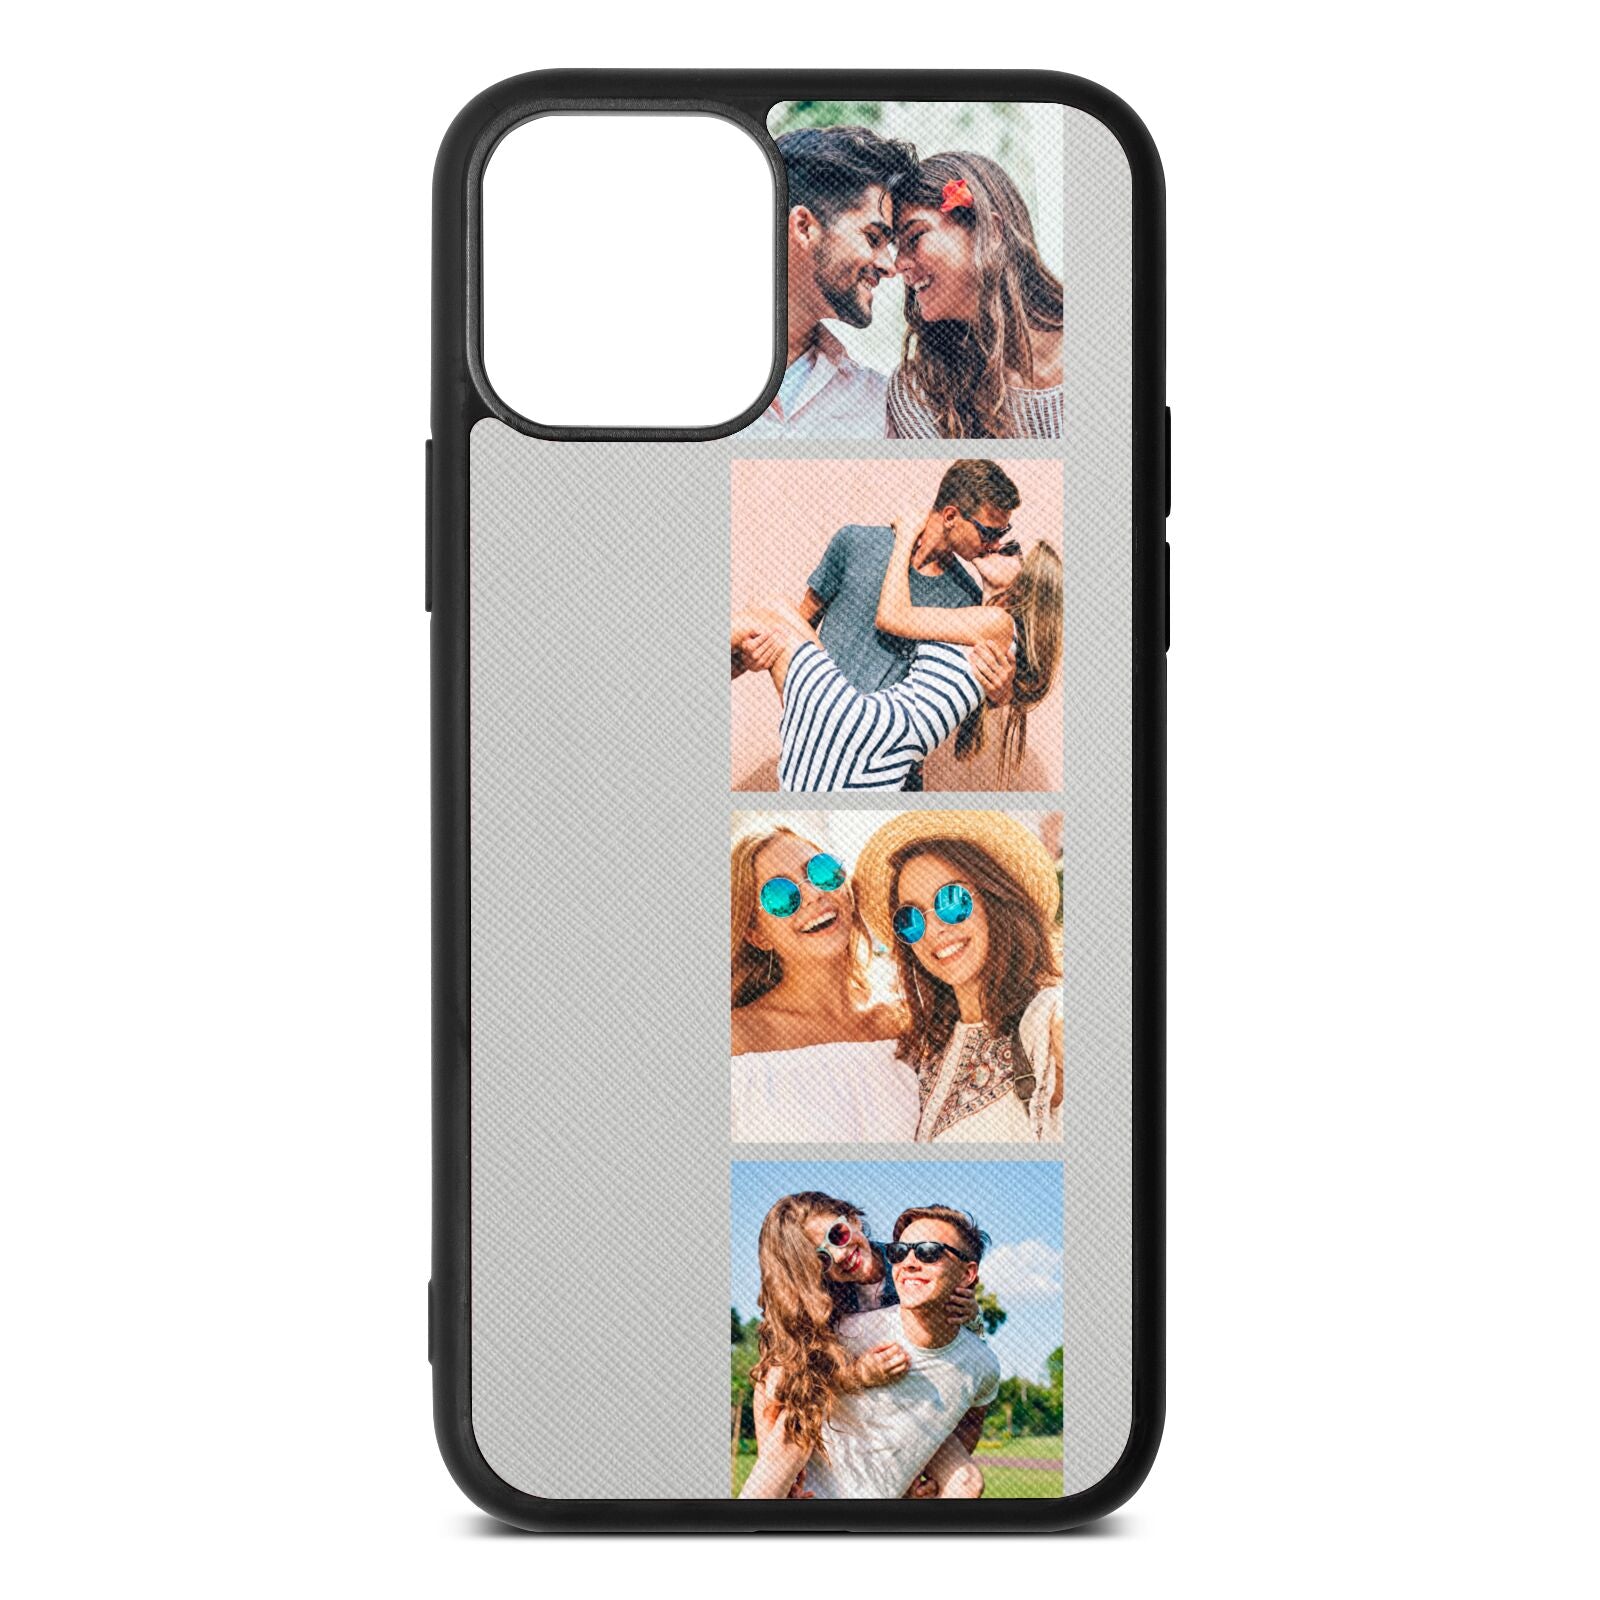 Photo Strip Montage Upload Silver Saffiano Leather iPhone 11 Pro Case